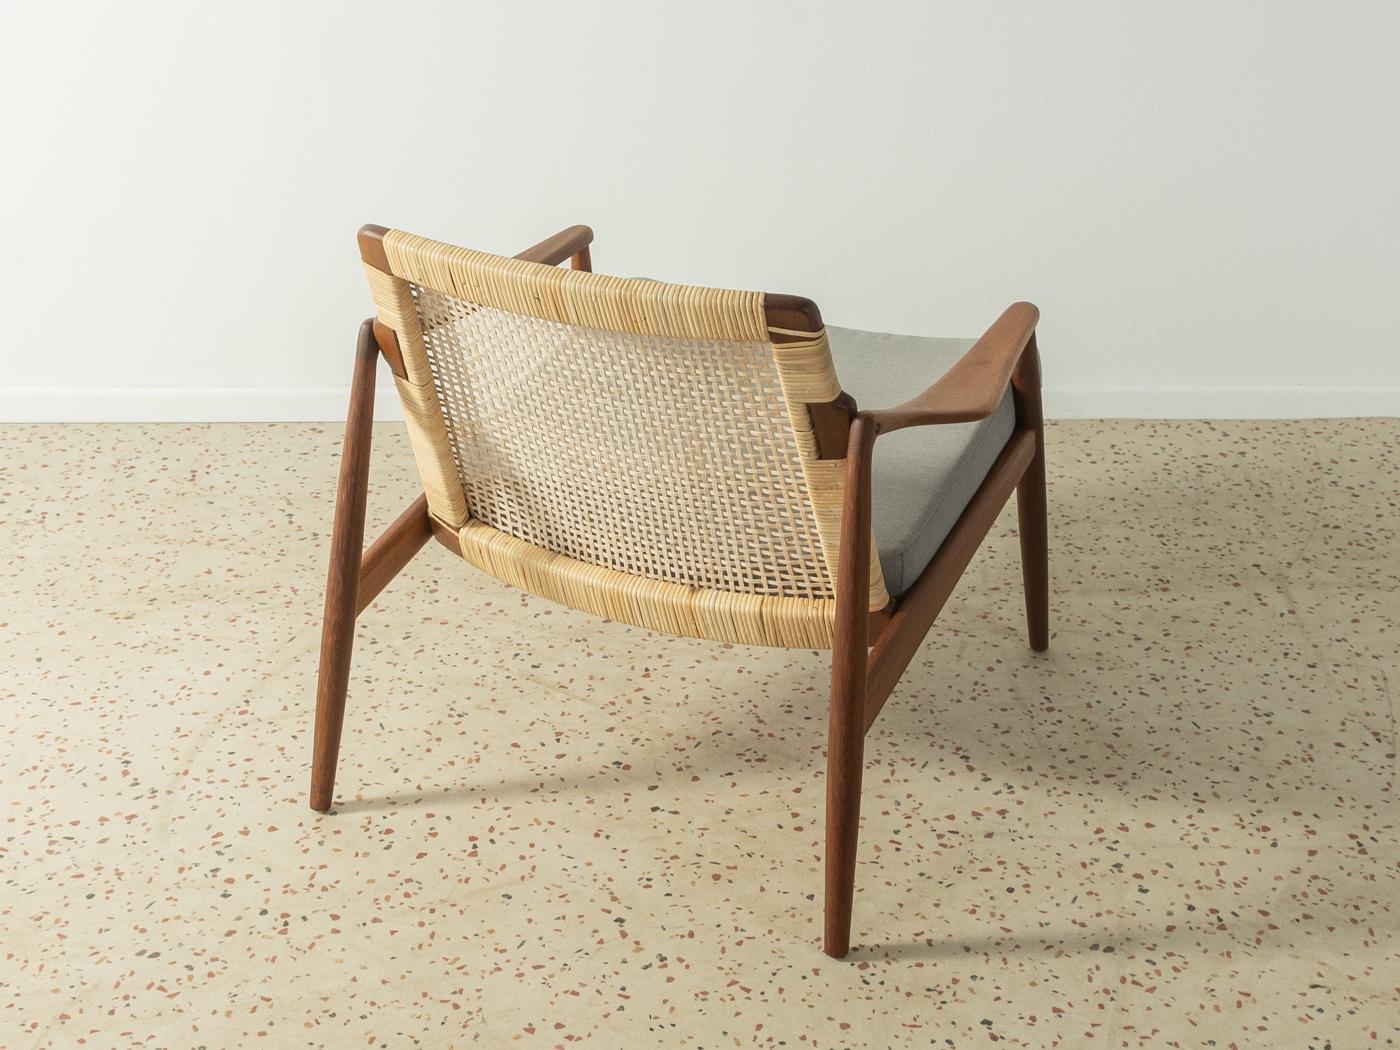 xclusive armchair, Type 400, from the 1950s by Hartmut Lohmeyer for Wilkhahn. High-quality teak frame with new, contemporary wicker work. The armchair has been reupholstered and covered with a high-quality grey upholstery fabric.

Quality